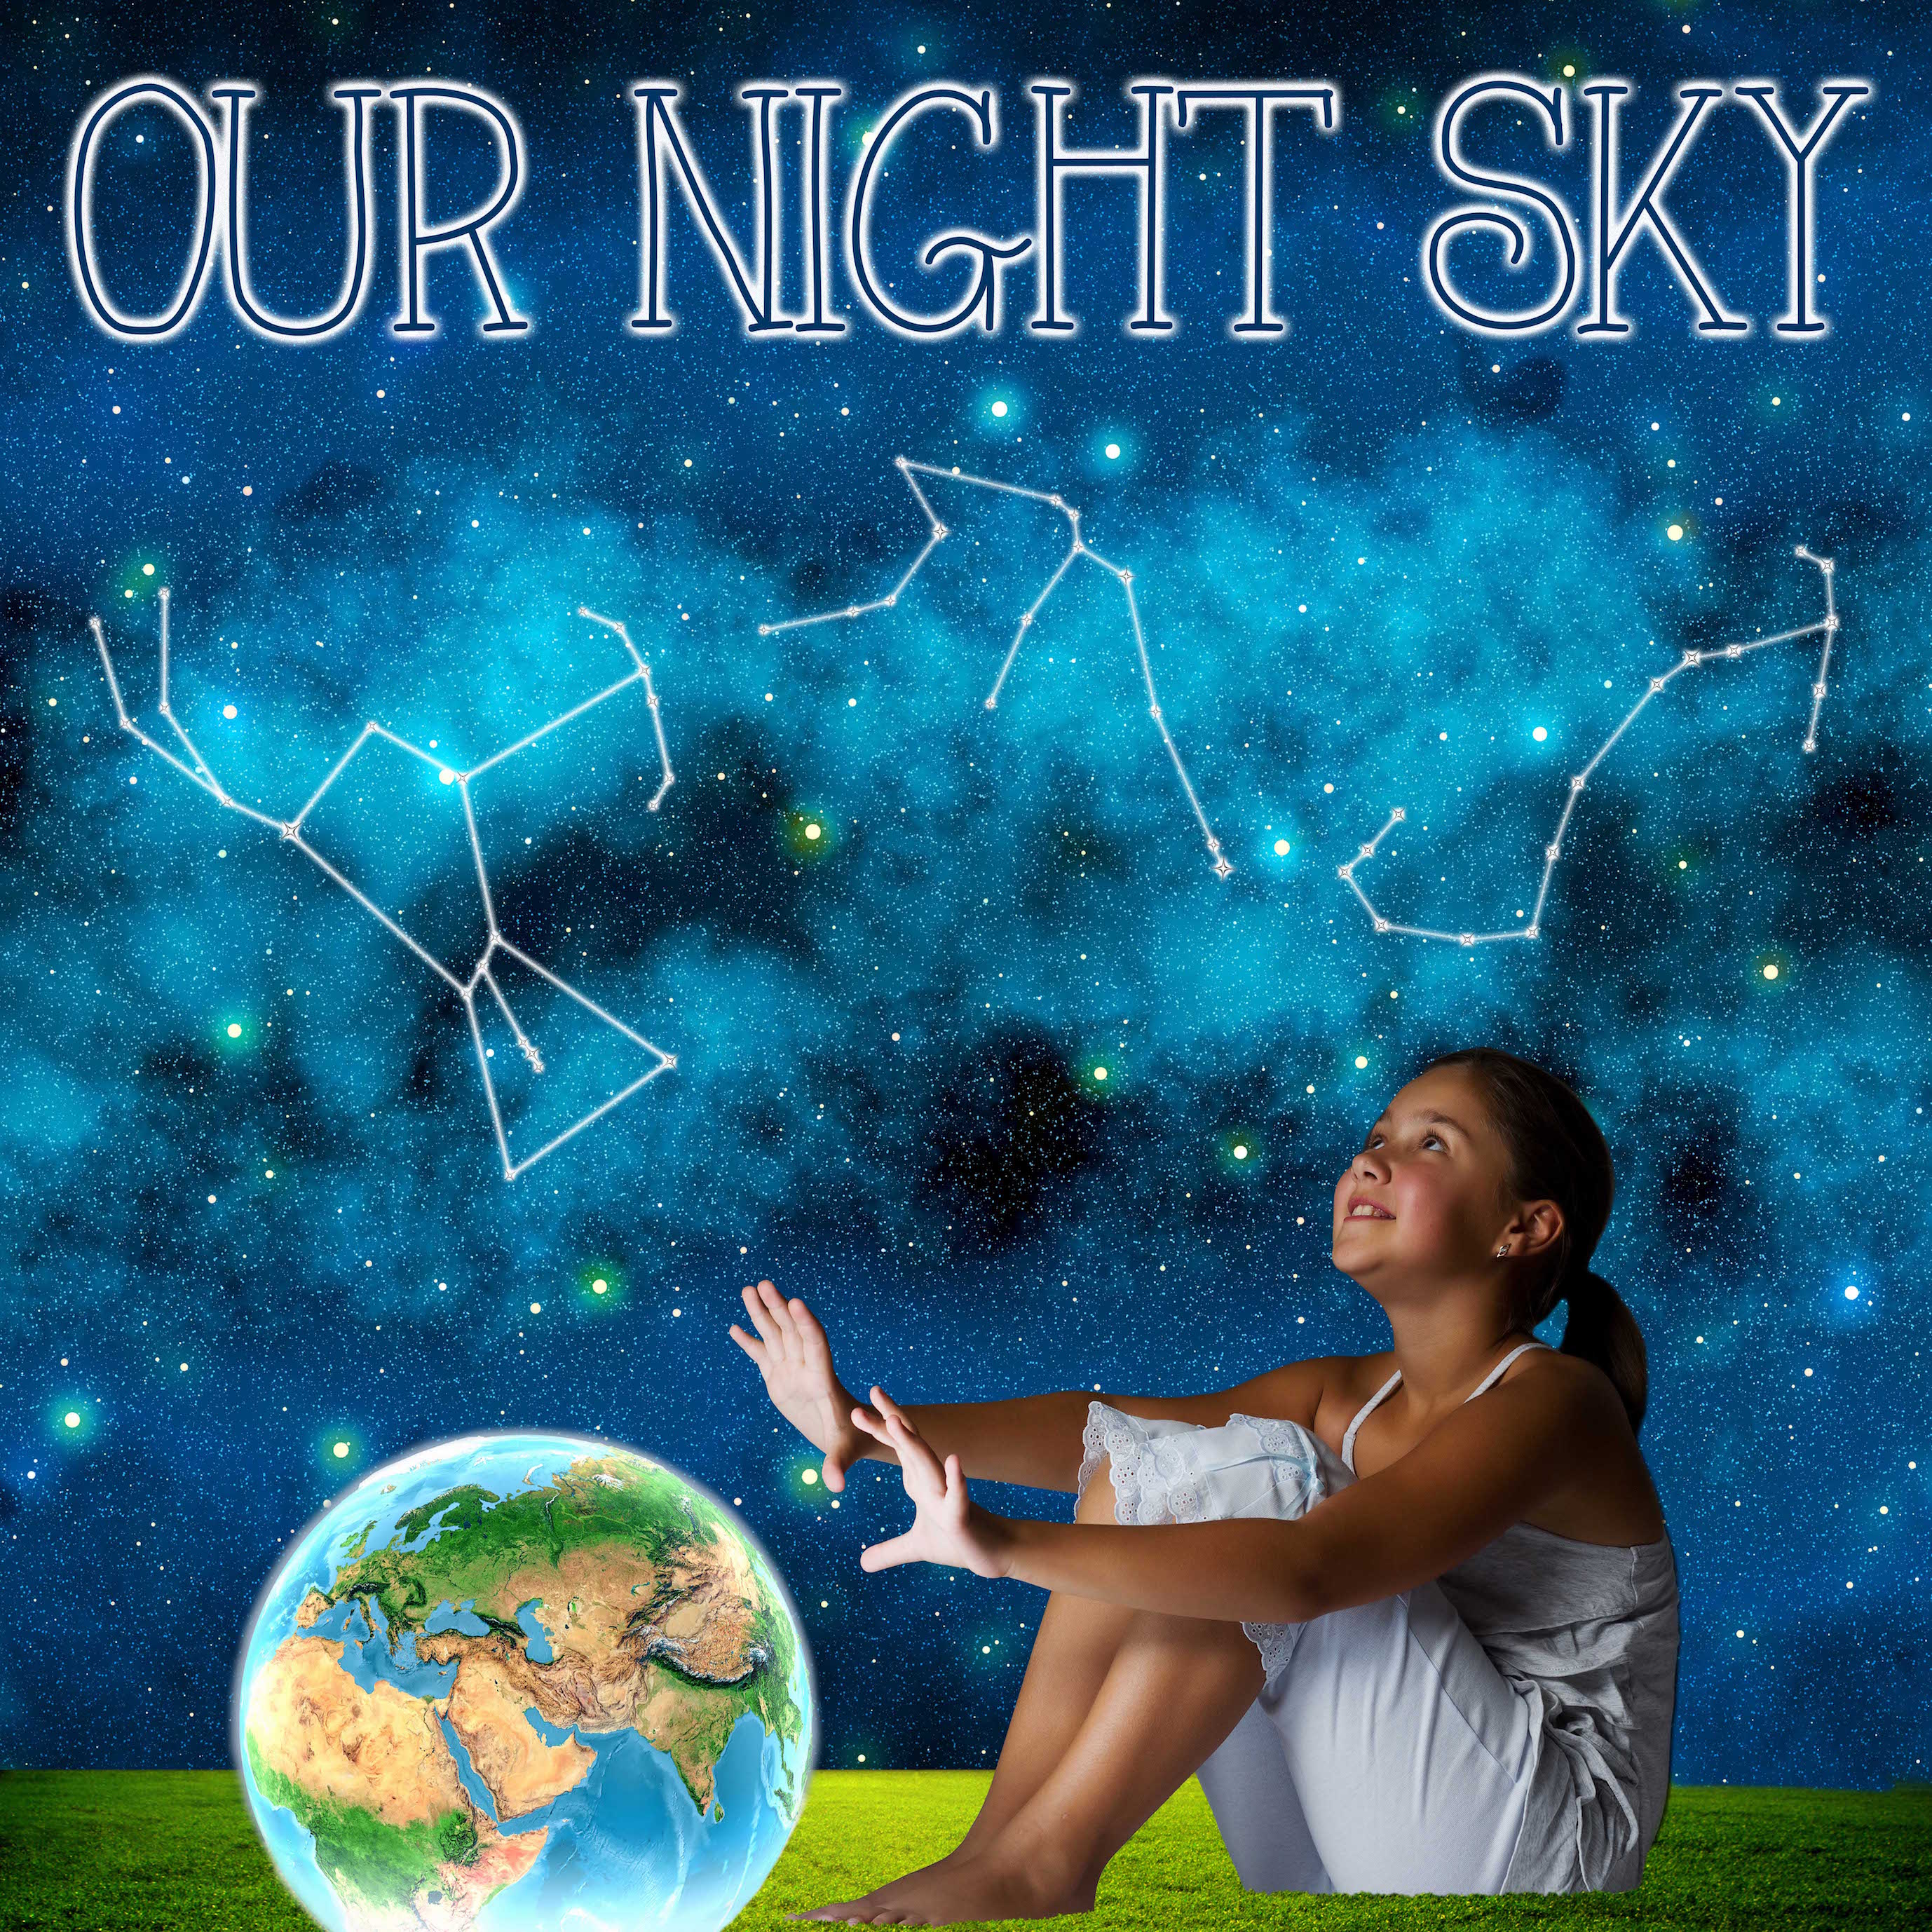 Our Night Sky July 3, 2017 performances at Maja Prentice Theatre, Mississauga Google image from https://www.discovermississauga.ca/component/ohanah/our-night-sky